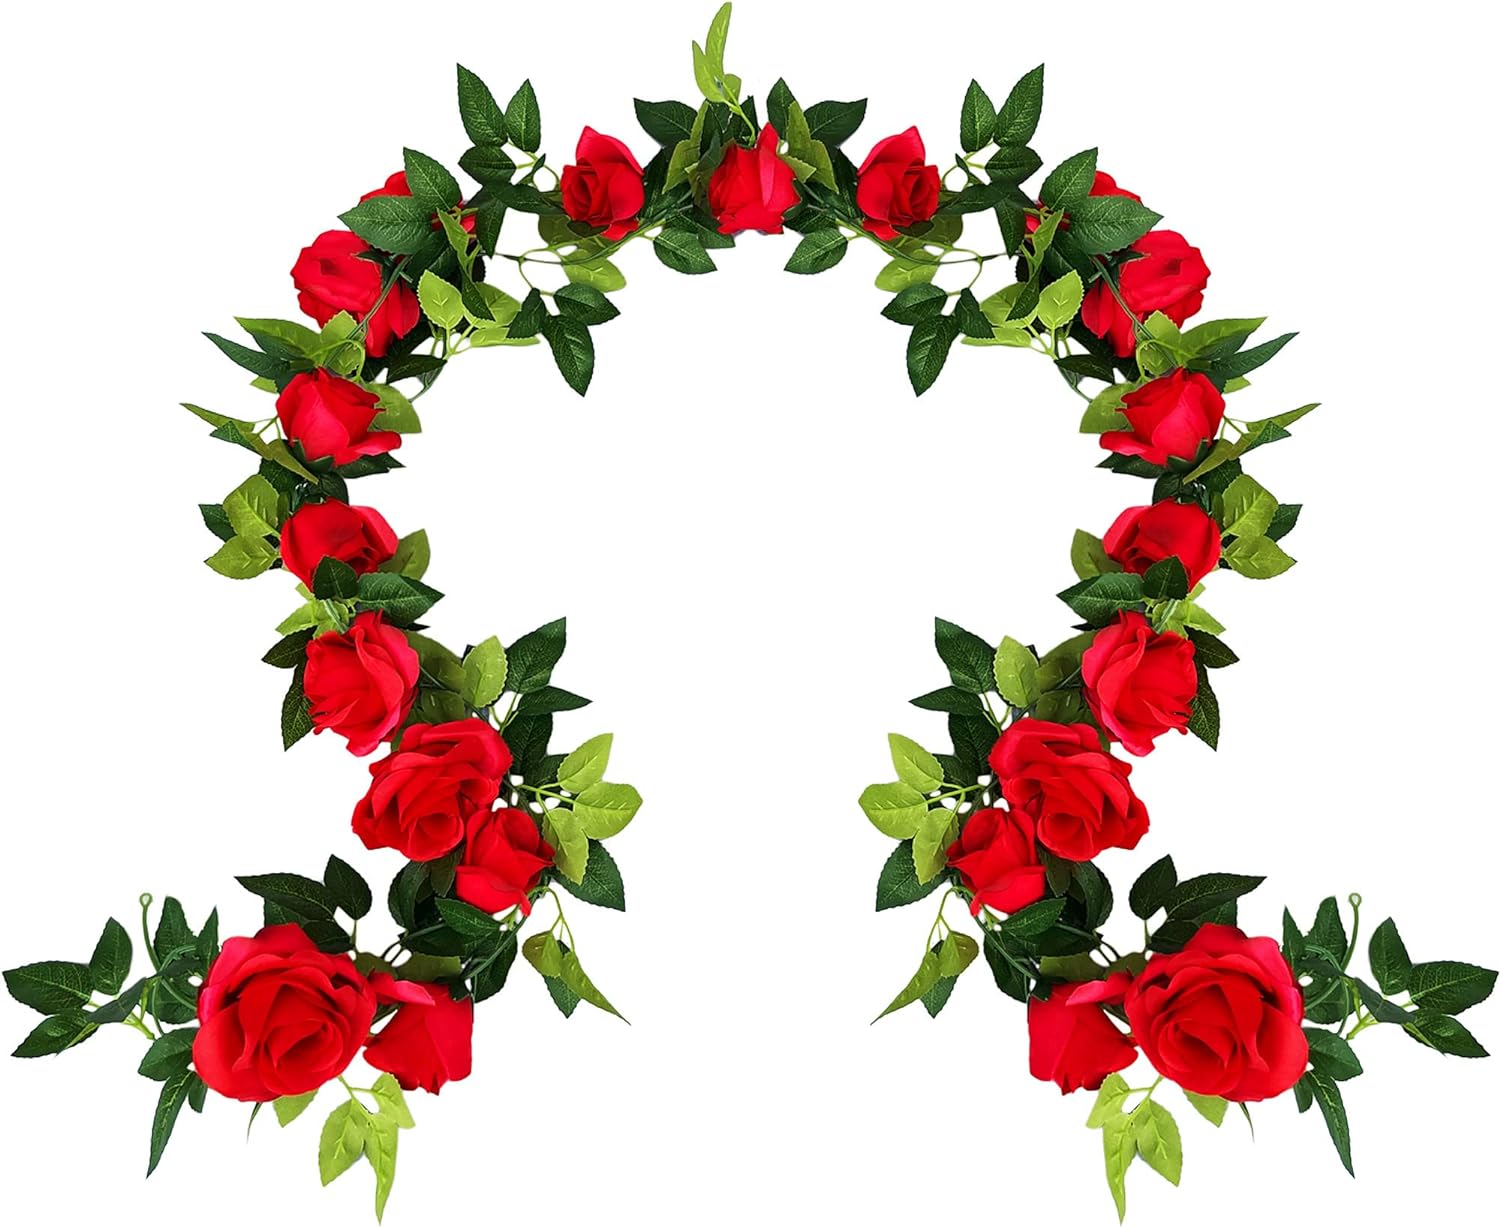 UKELER 2 Pack 14FT Artificial Rose Vines Red Flower Garland Artificial Rose Flowers with Green Leaves Floral Plant for Wedding Arch Party Garden Craft Home Decor